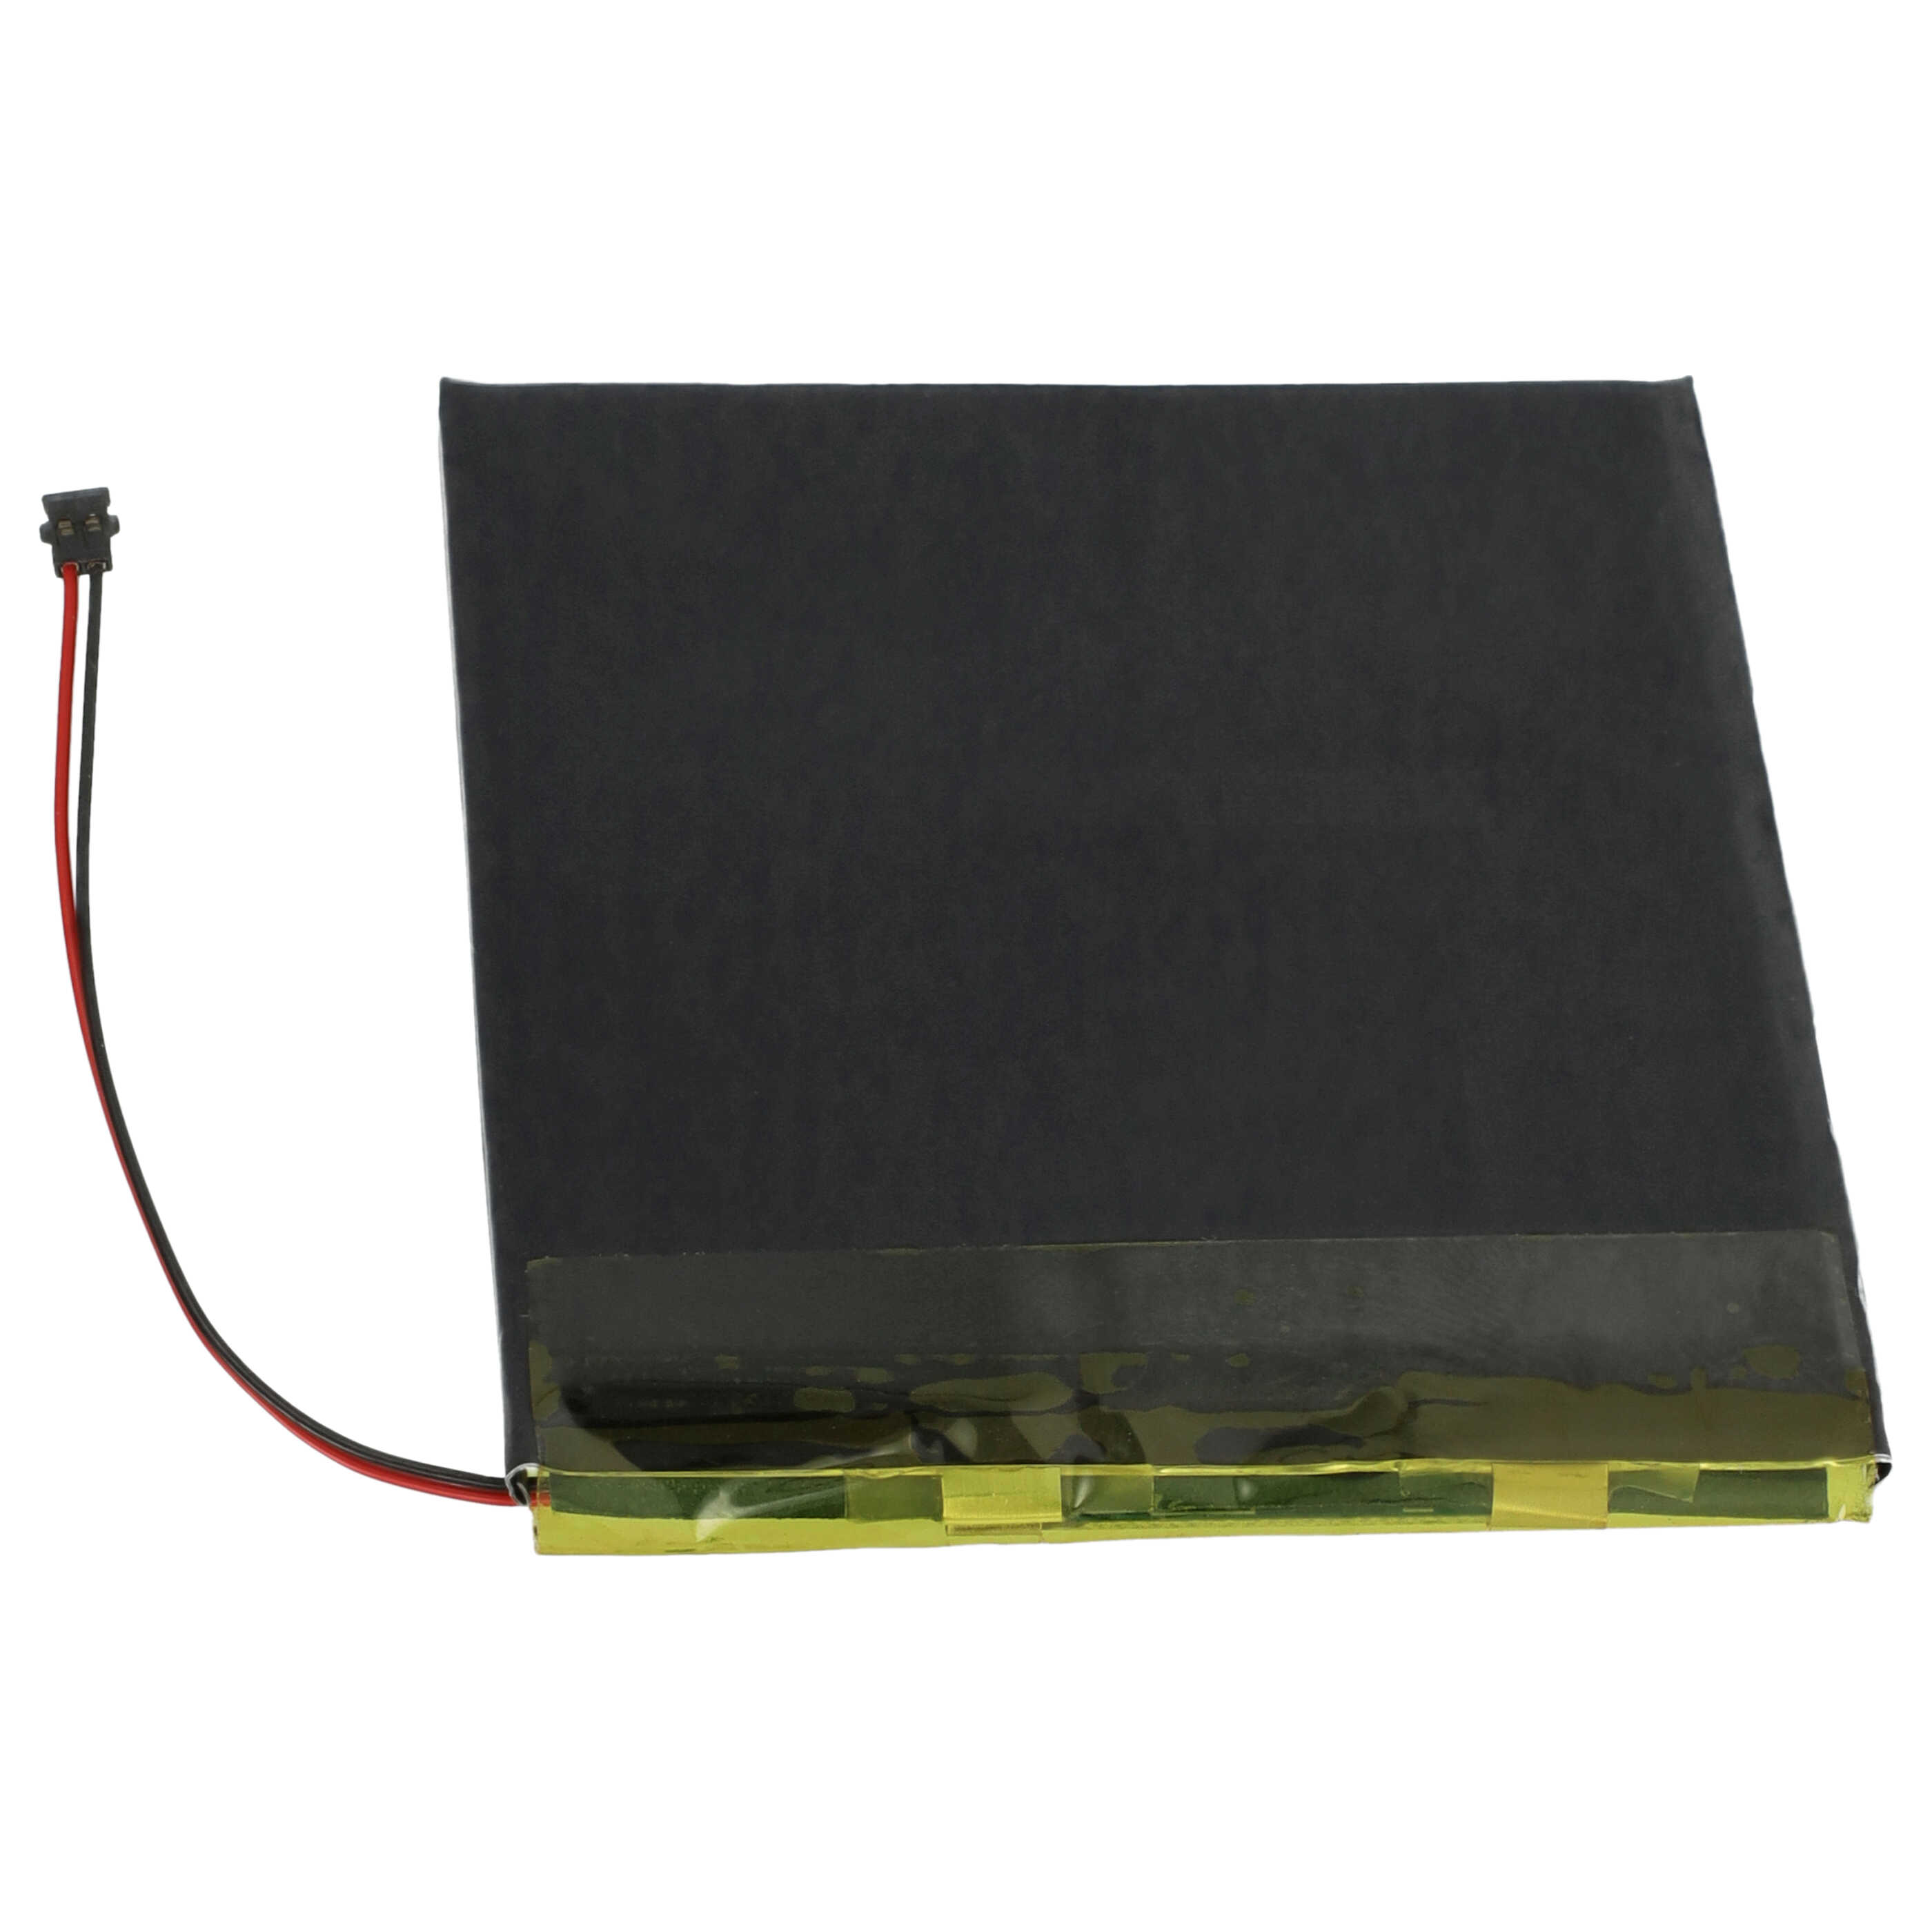 E-Book Battery Replacement for Digma 306070PL - 1450mAh 3.7V Li-polymer